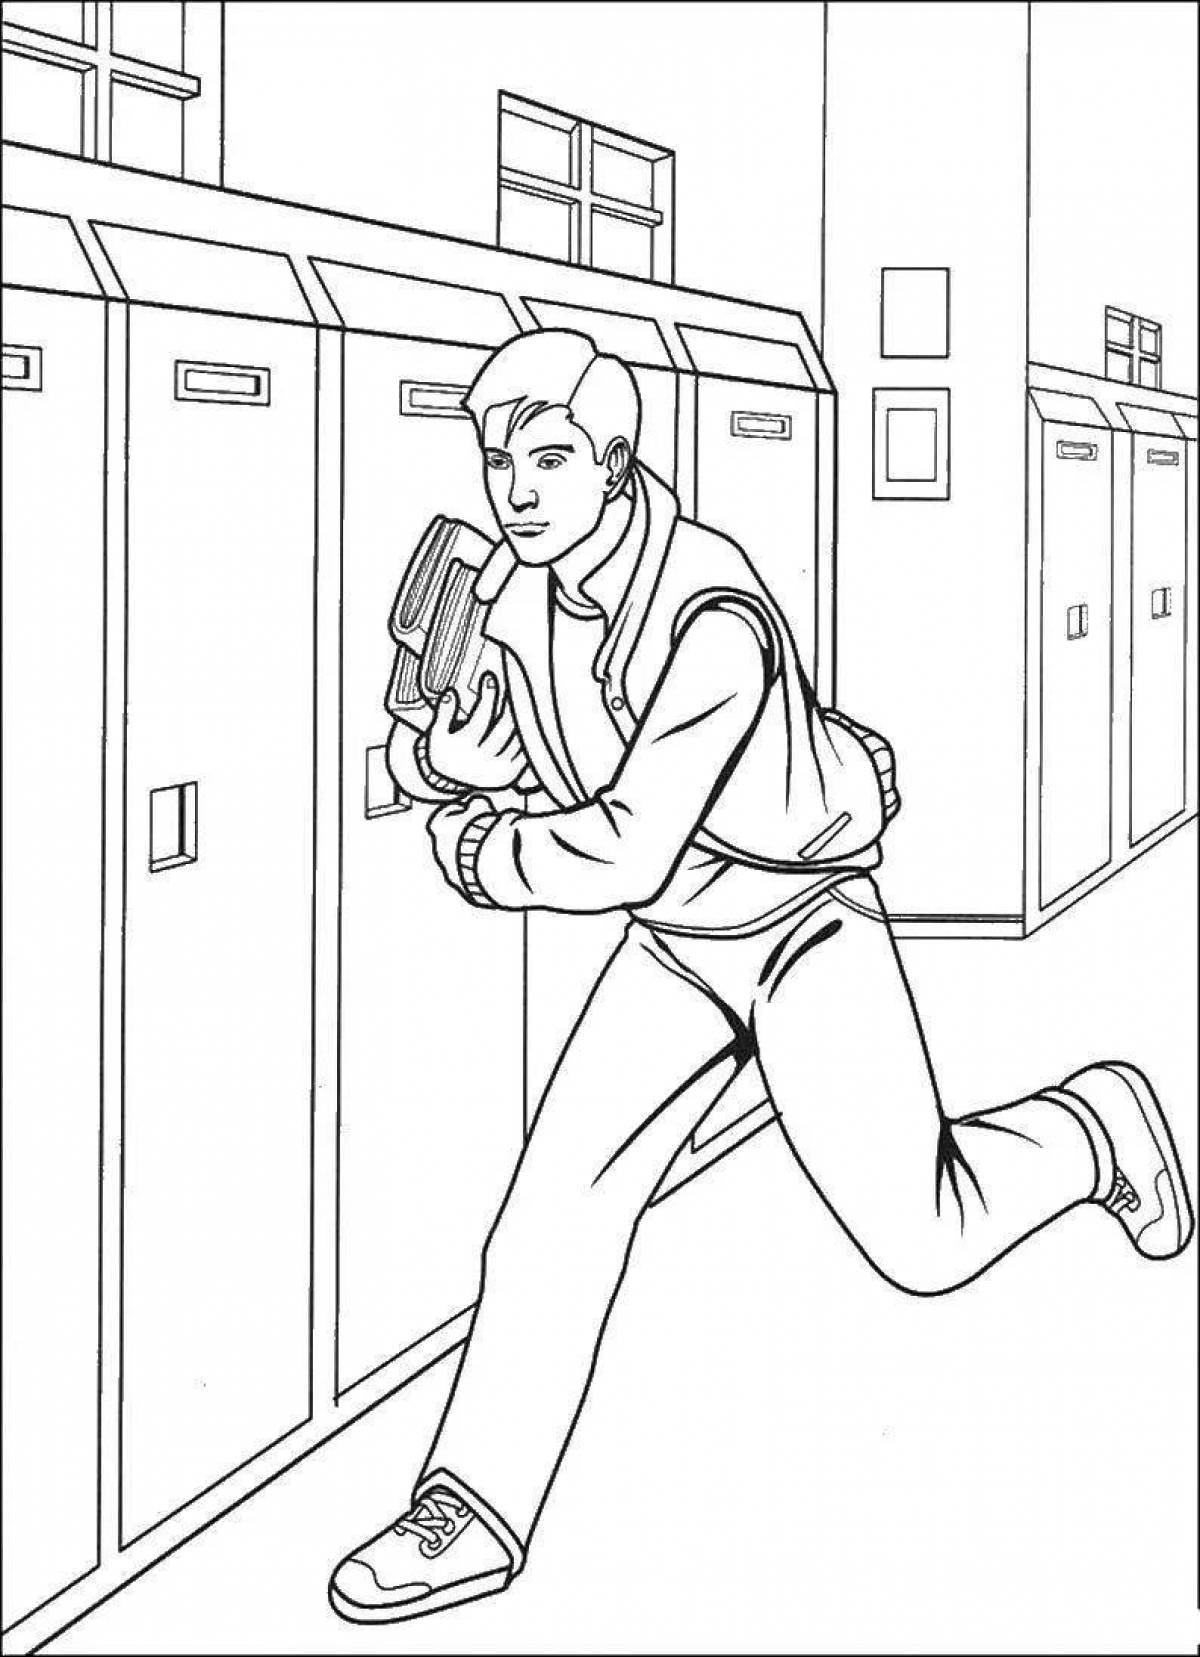 Peter parker's creative coloring book